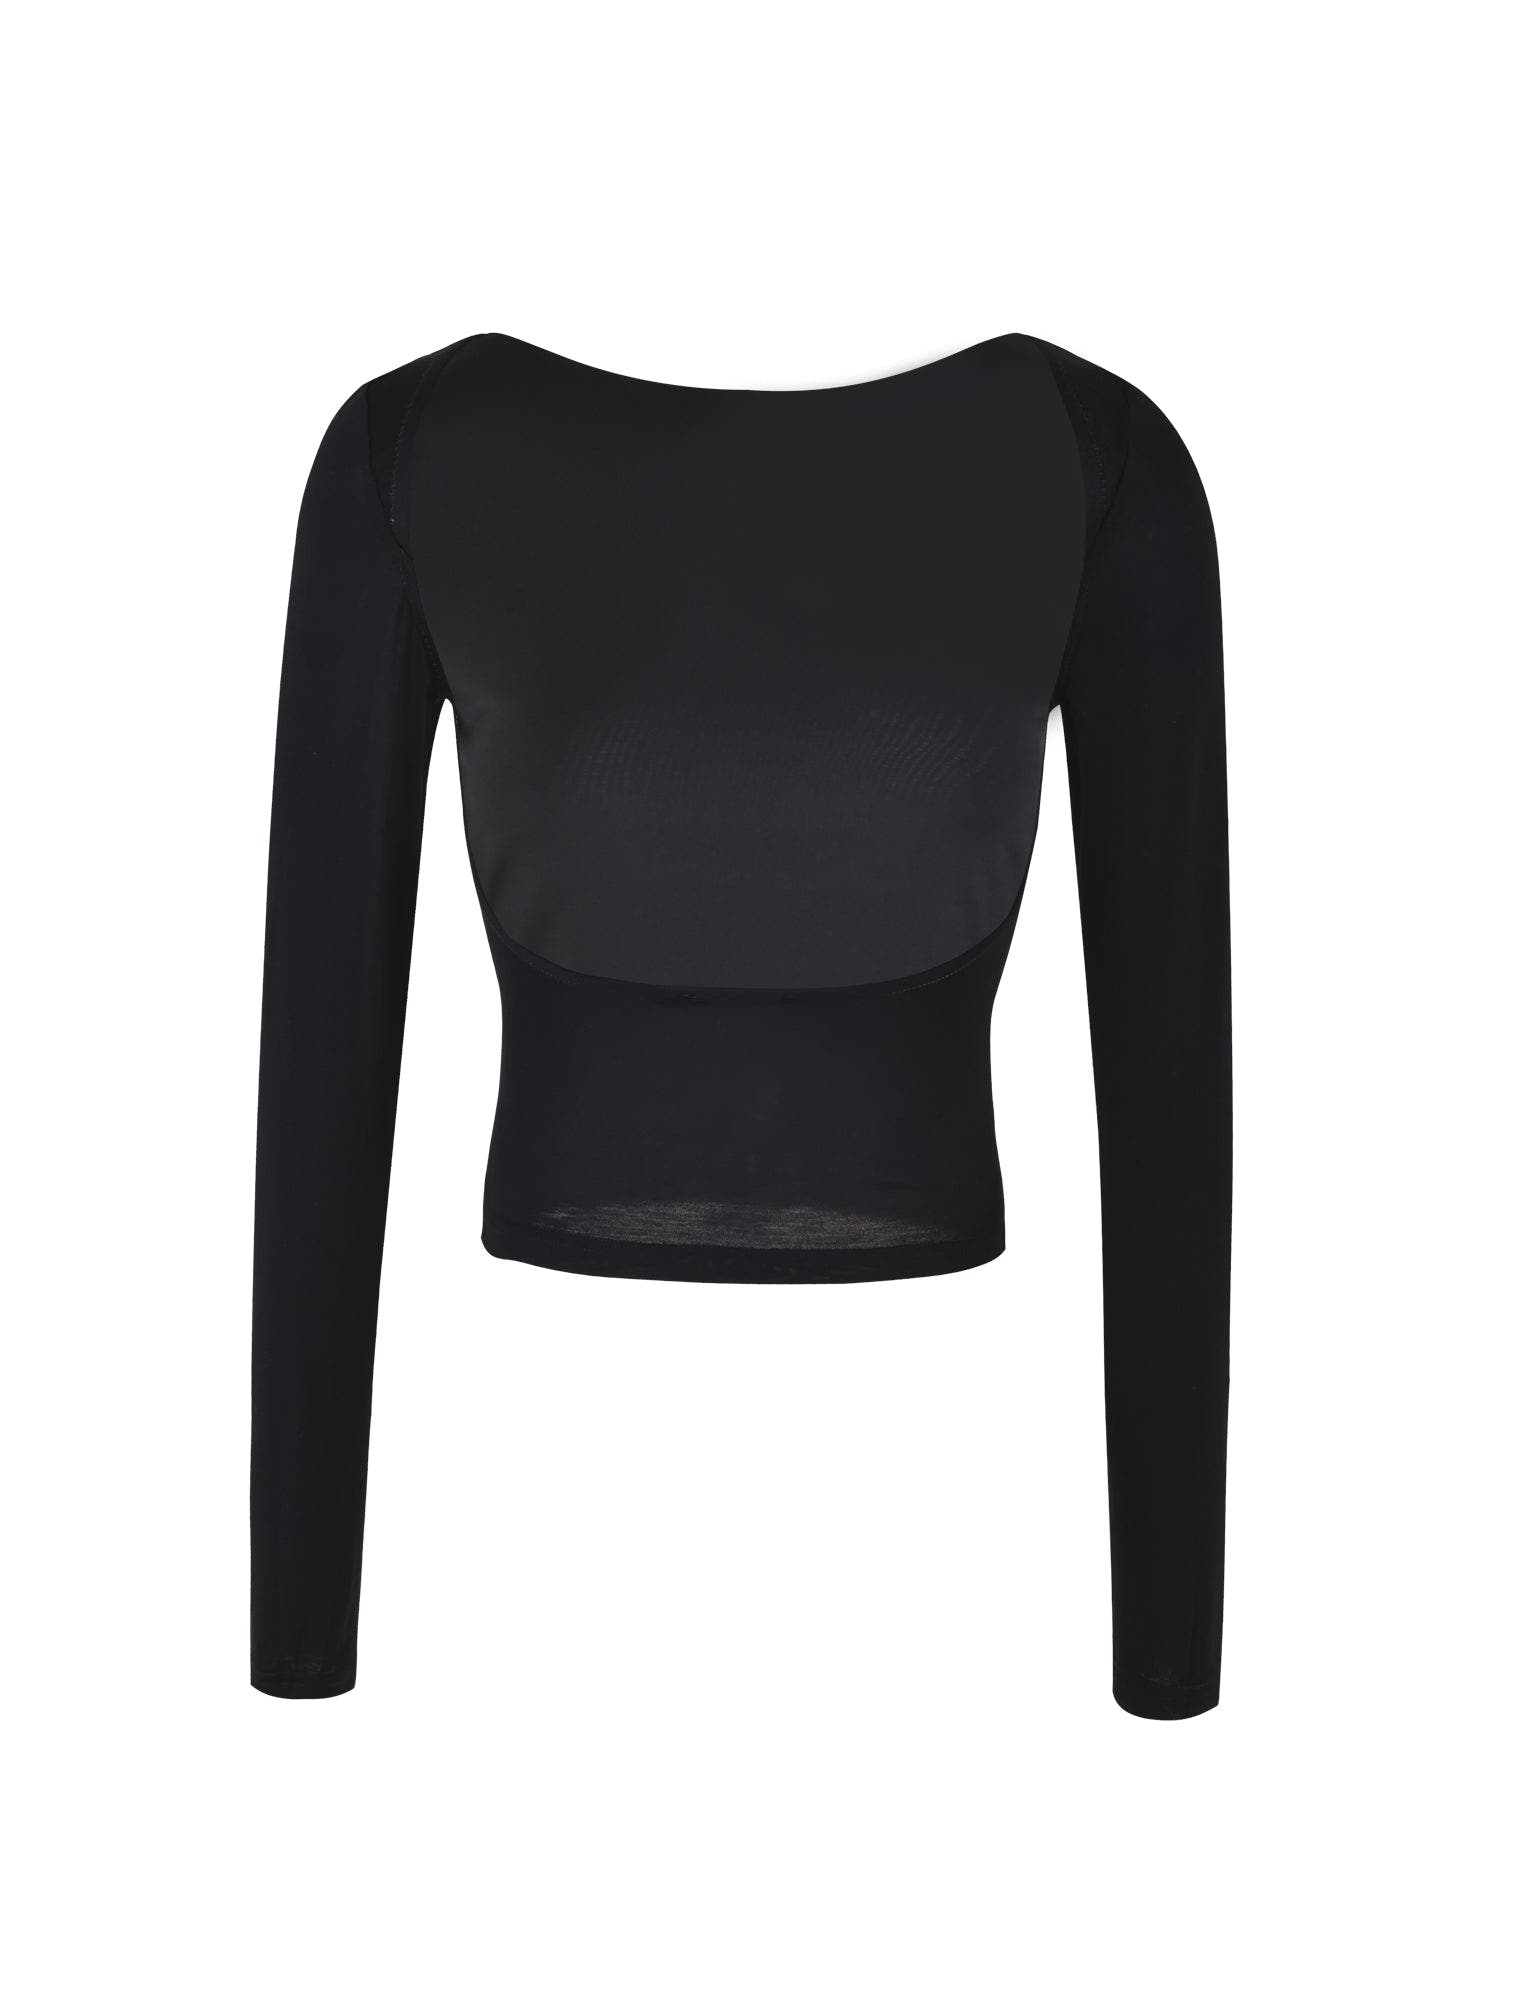 QUINNELL TOP - BLACK